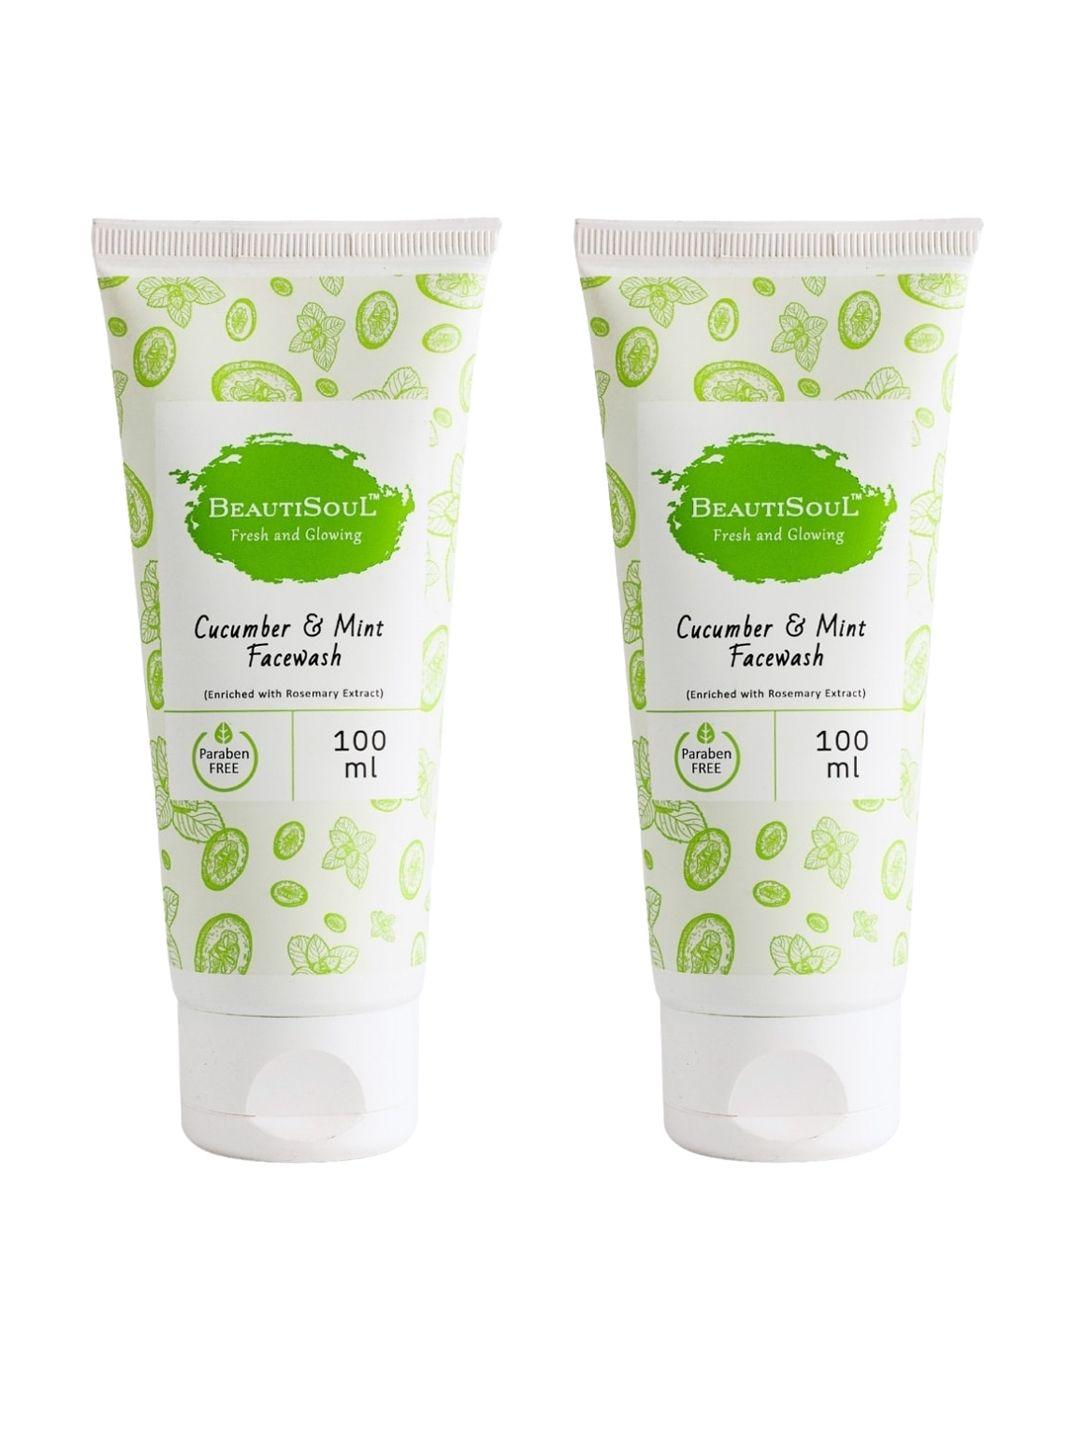 beautisoul pack of 2 cucumber and mint face wash - 100ml each